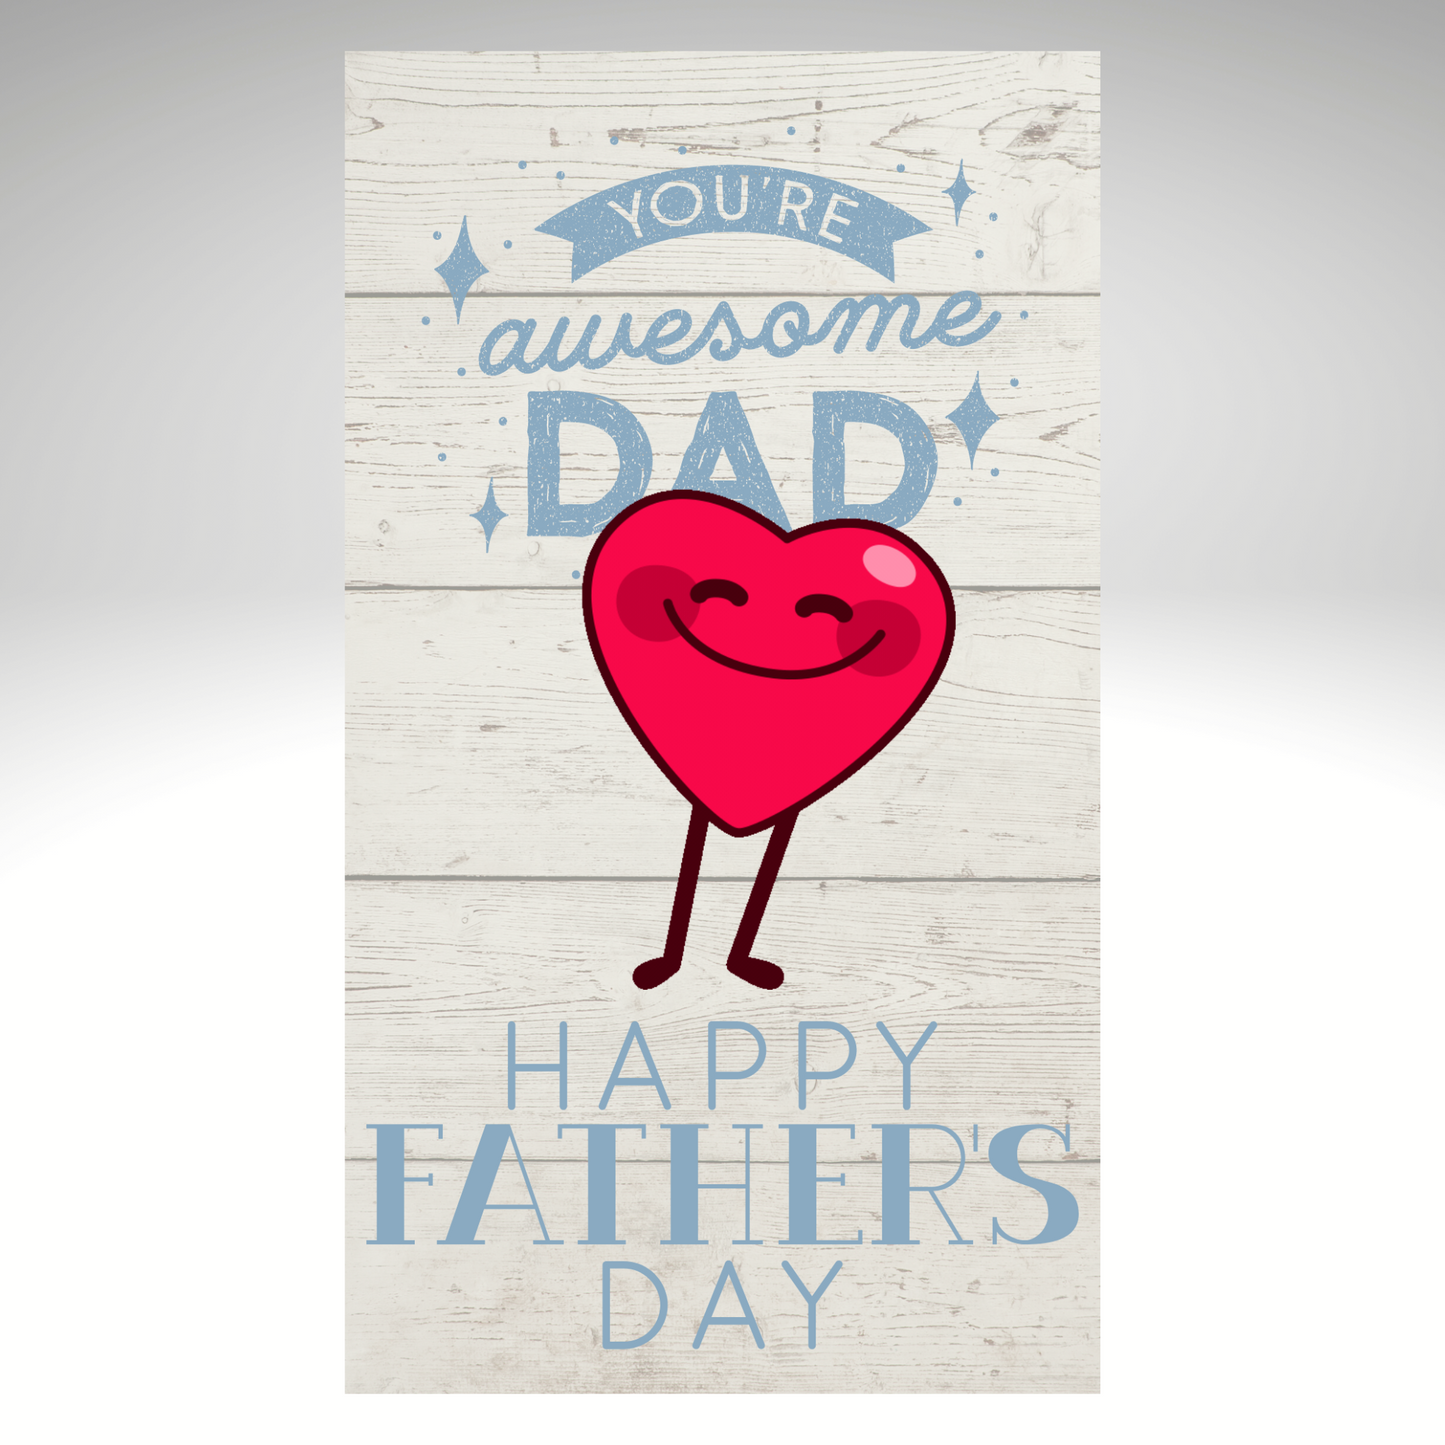 Fathers Day E-Card - Bouncing Heart MP4 Video Message